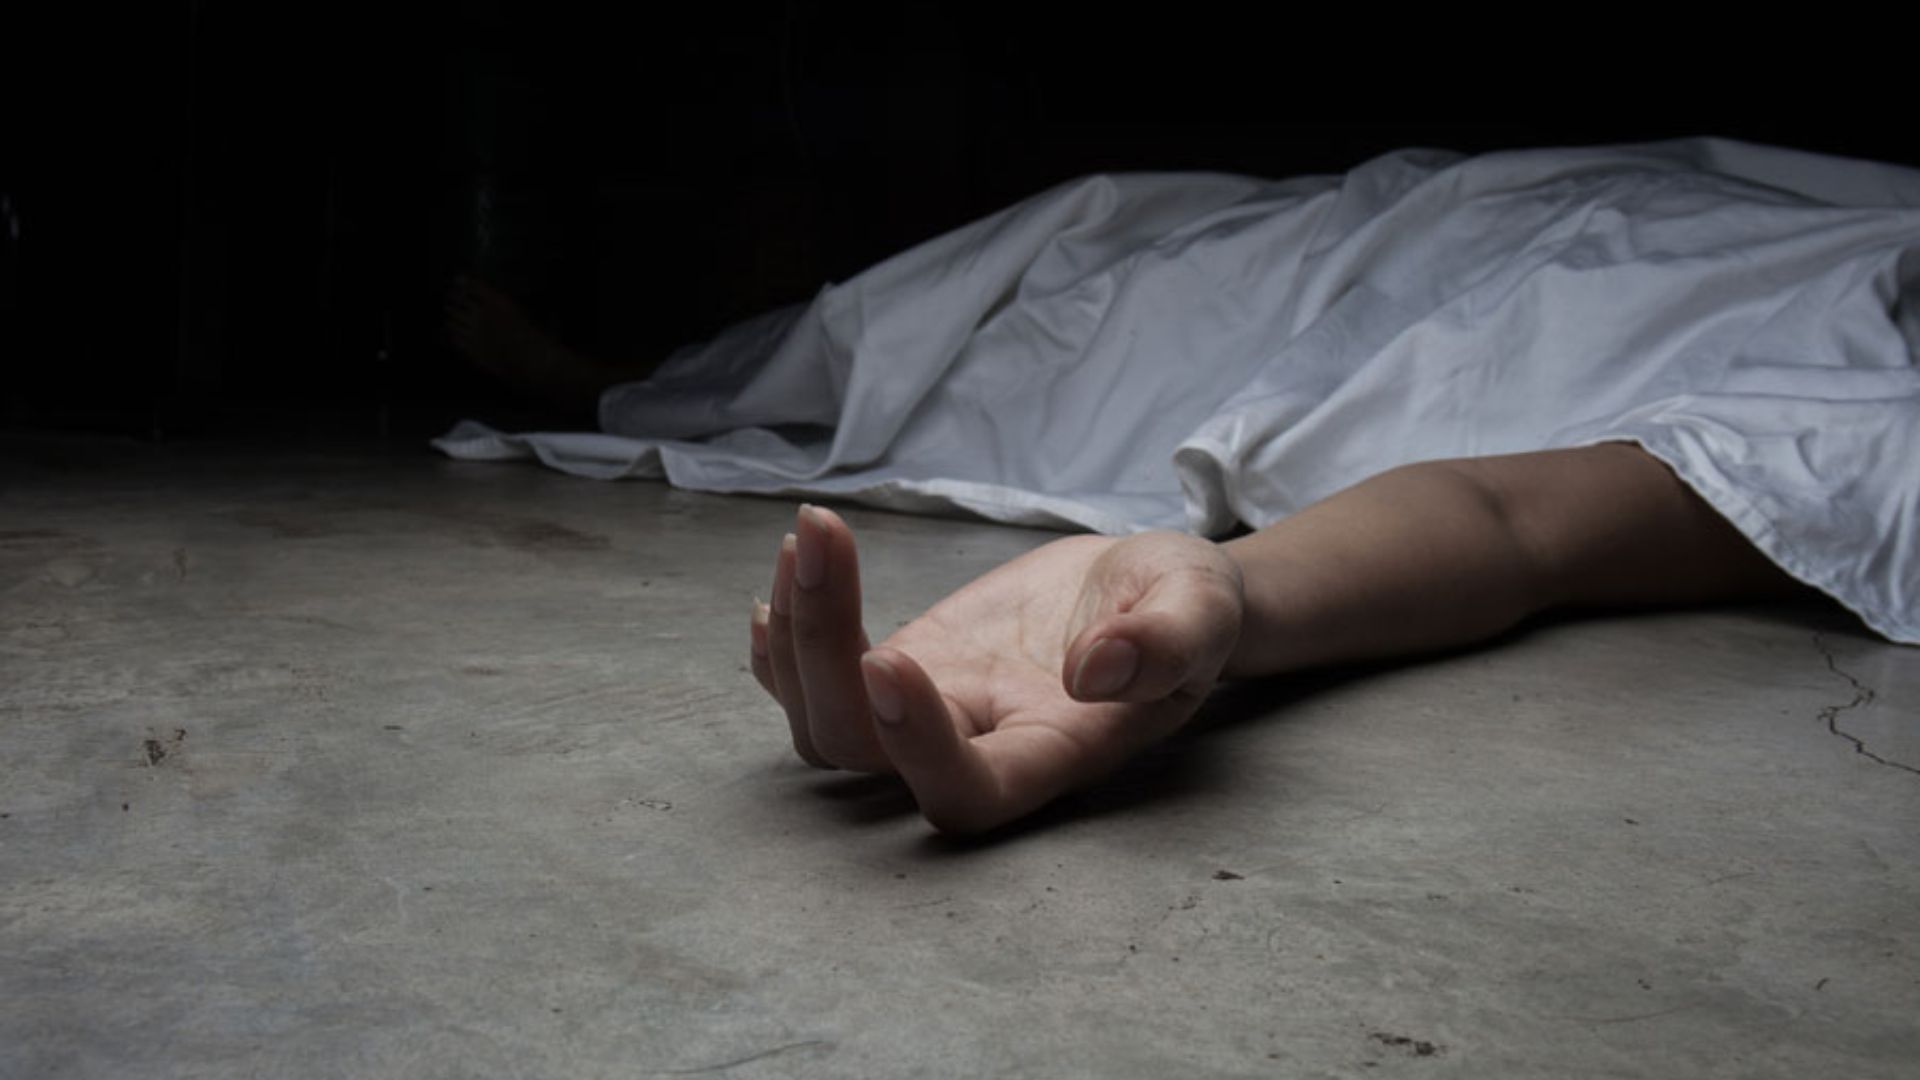 A Dead Person Lying On A Concrete Floor With An Arm Outstretched